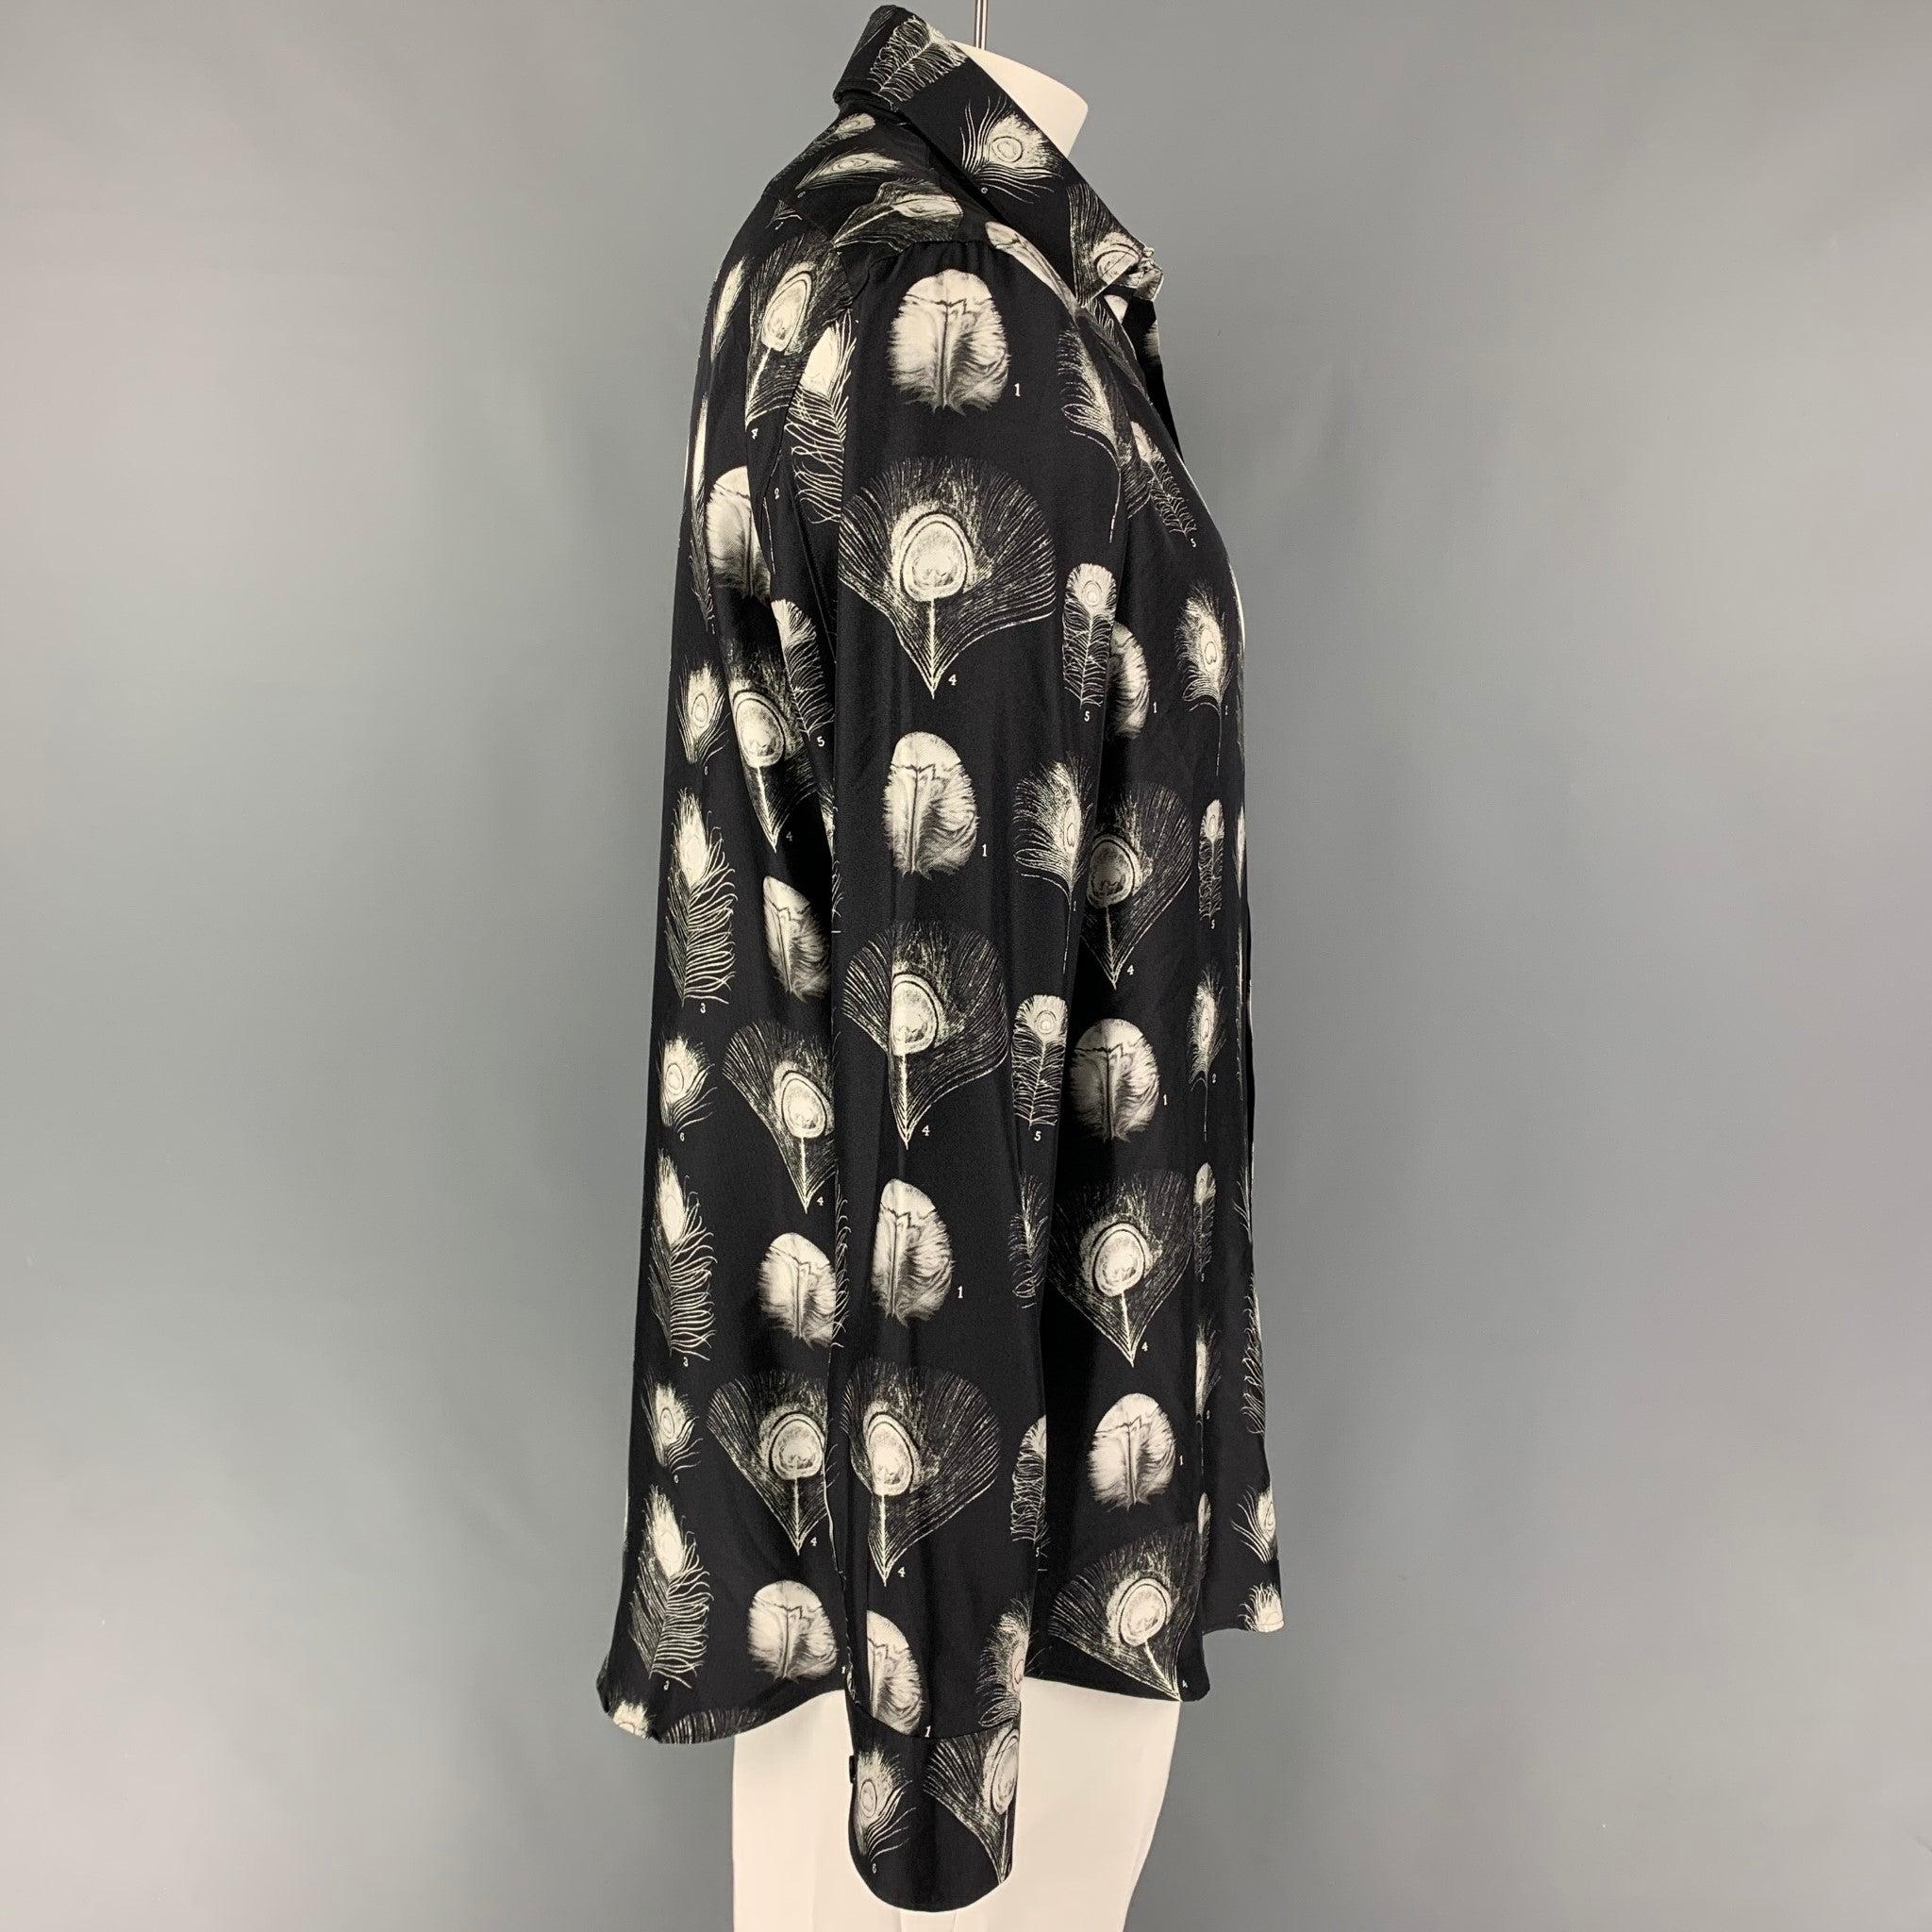 ALEXANDER McQUEEN Fall-Winter 2017 long sleeve shirt comes in a black & white print silk featuring a spread collar and a button up closure. Made in Italy.
Excellent
Pre-Owned Condition. 

Marked:   17+ 

Measurements: 
 
Shoulder:
20 inches  Chest: